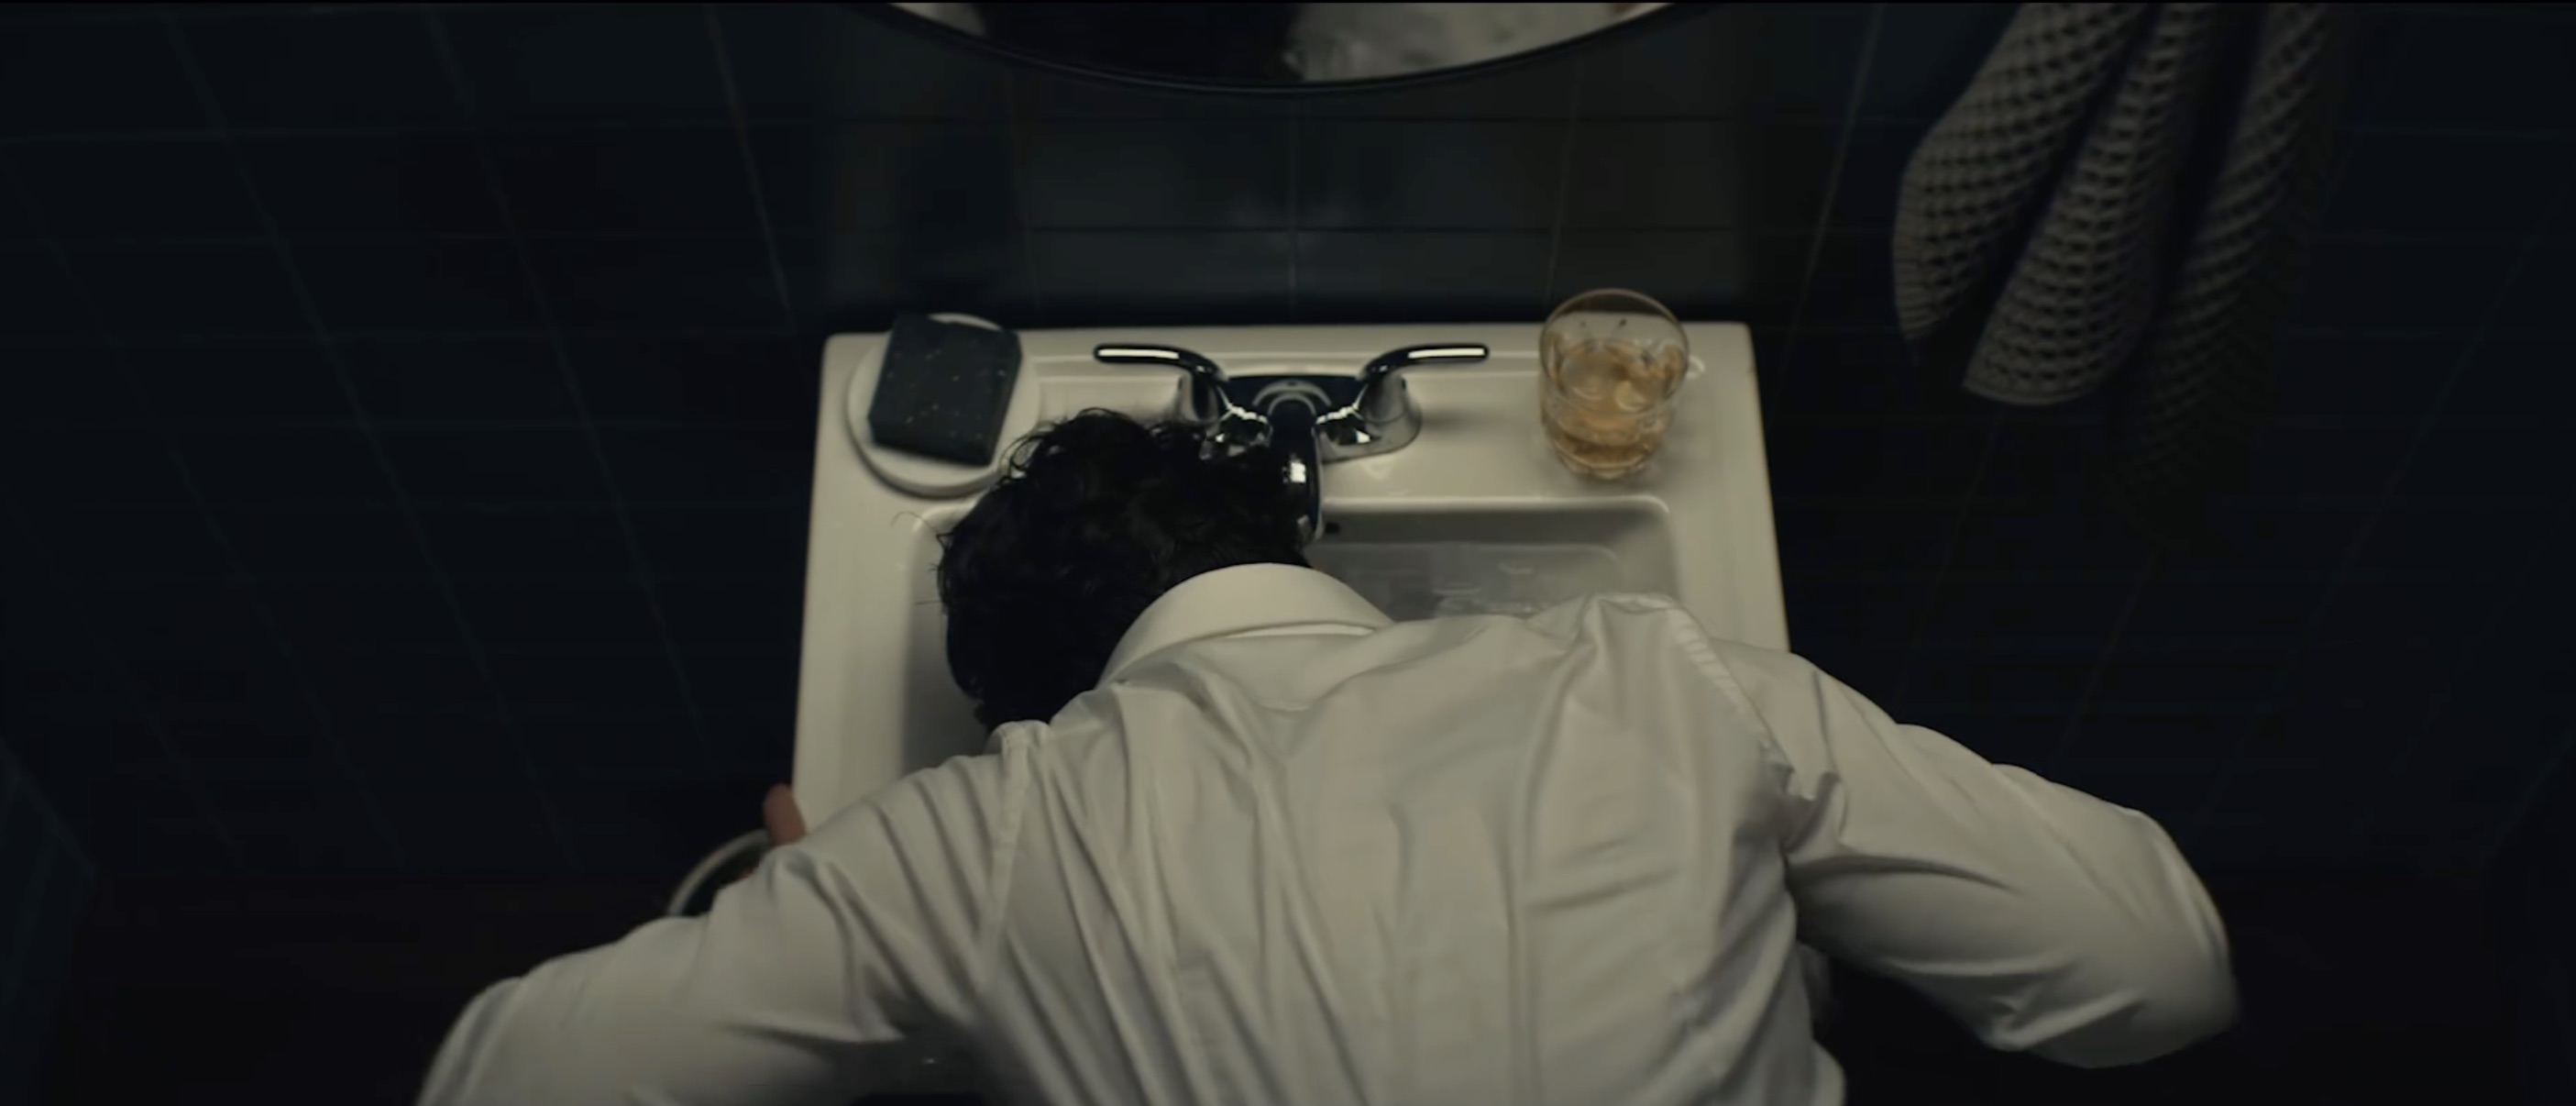 The video opens with a man dunking his face in a sink full of ice